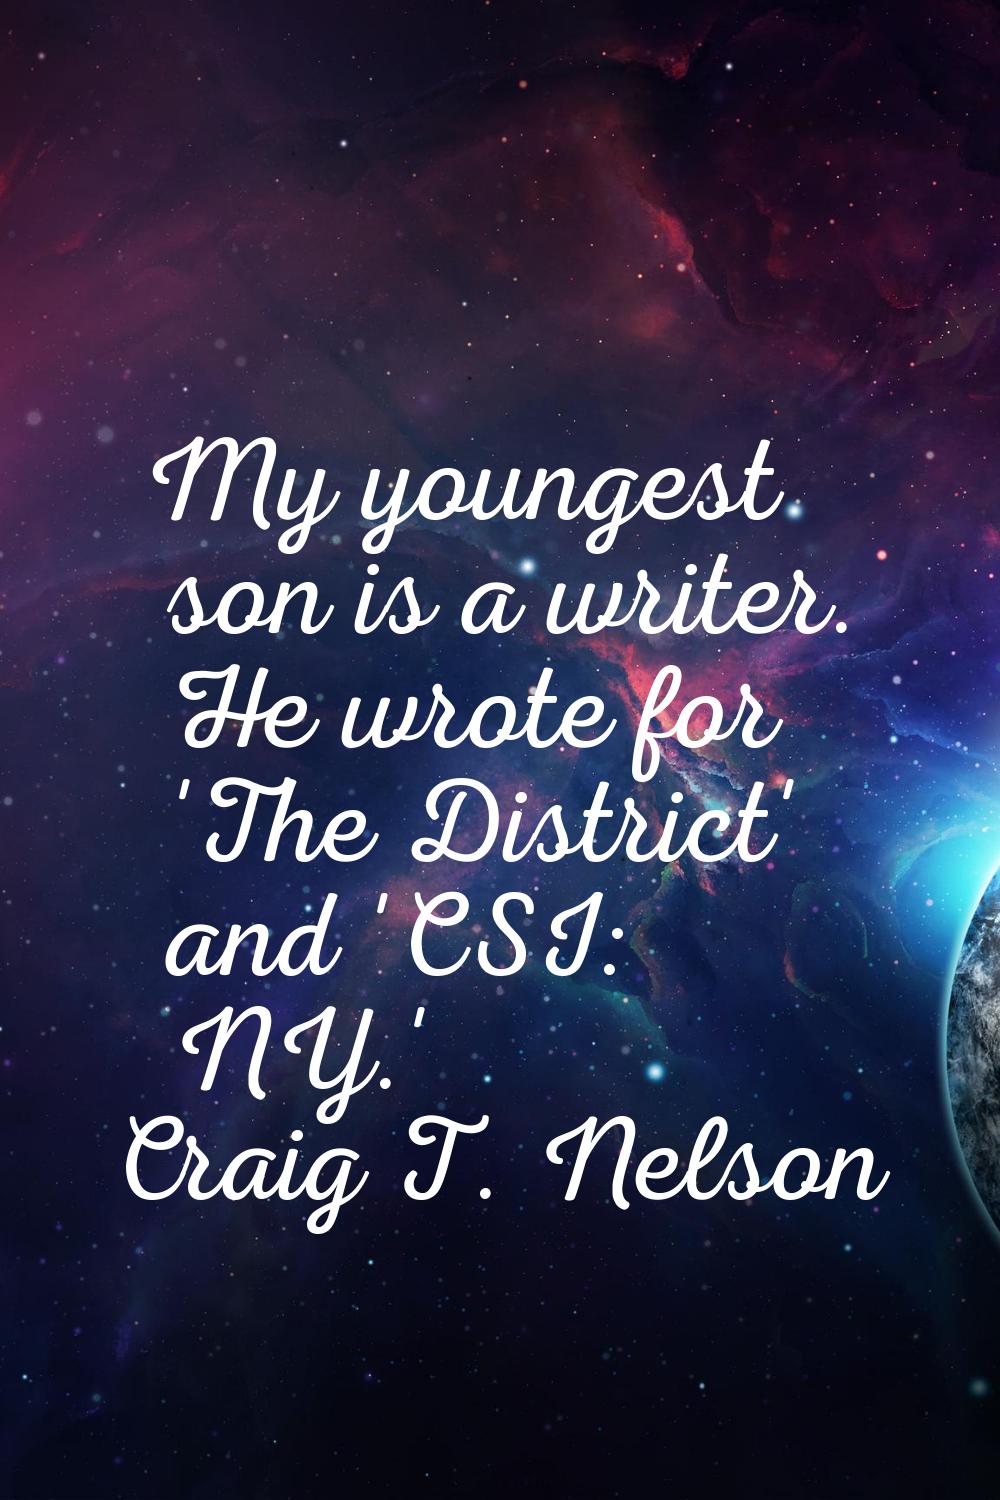 My youngest son is a writer. He wrote for 'The District' and 'CSI: NY.'